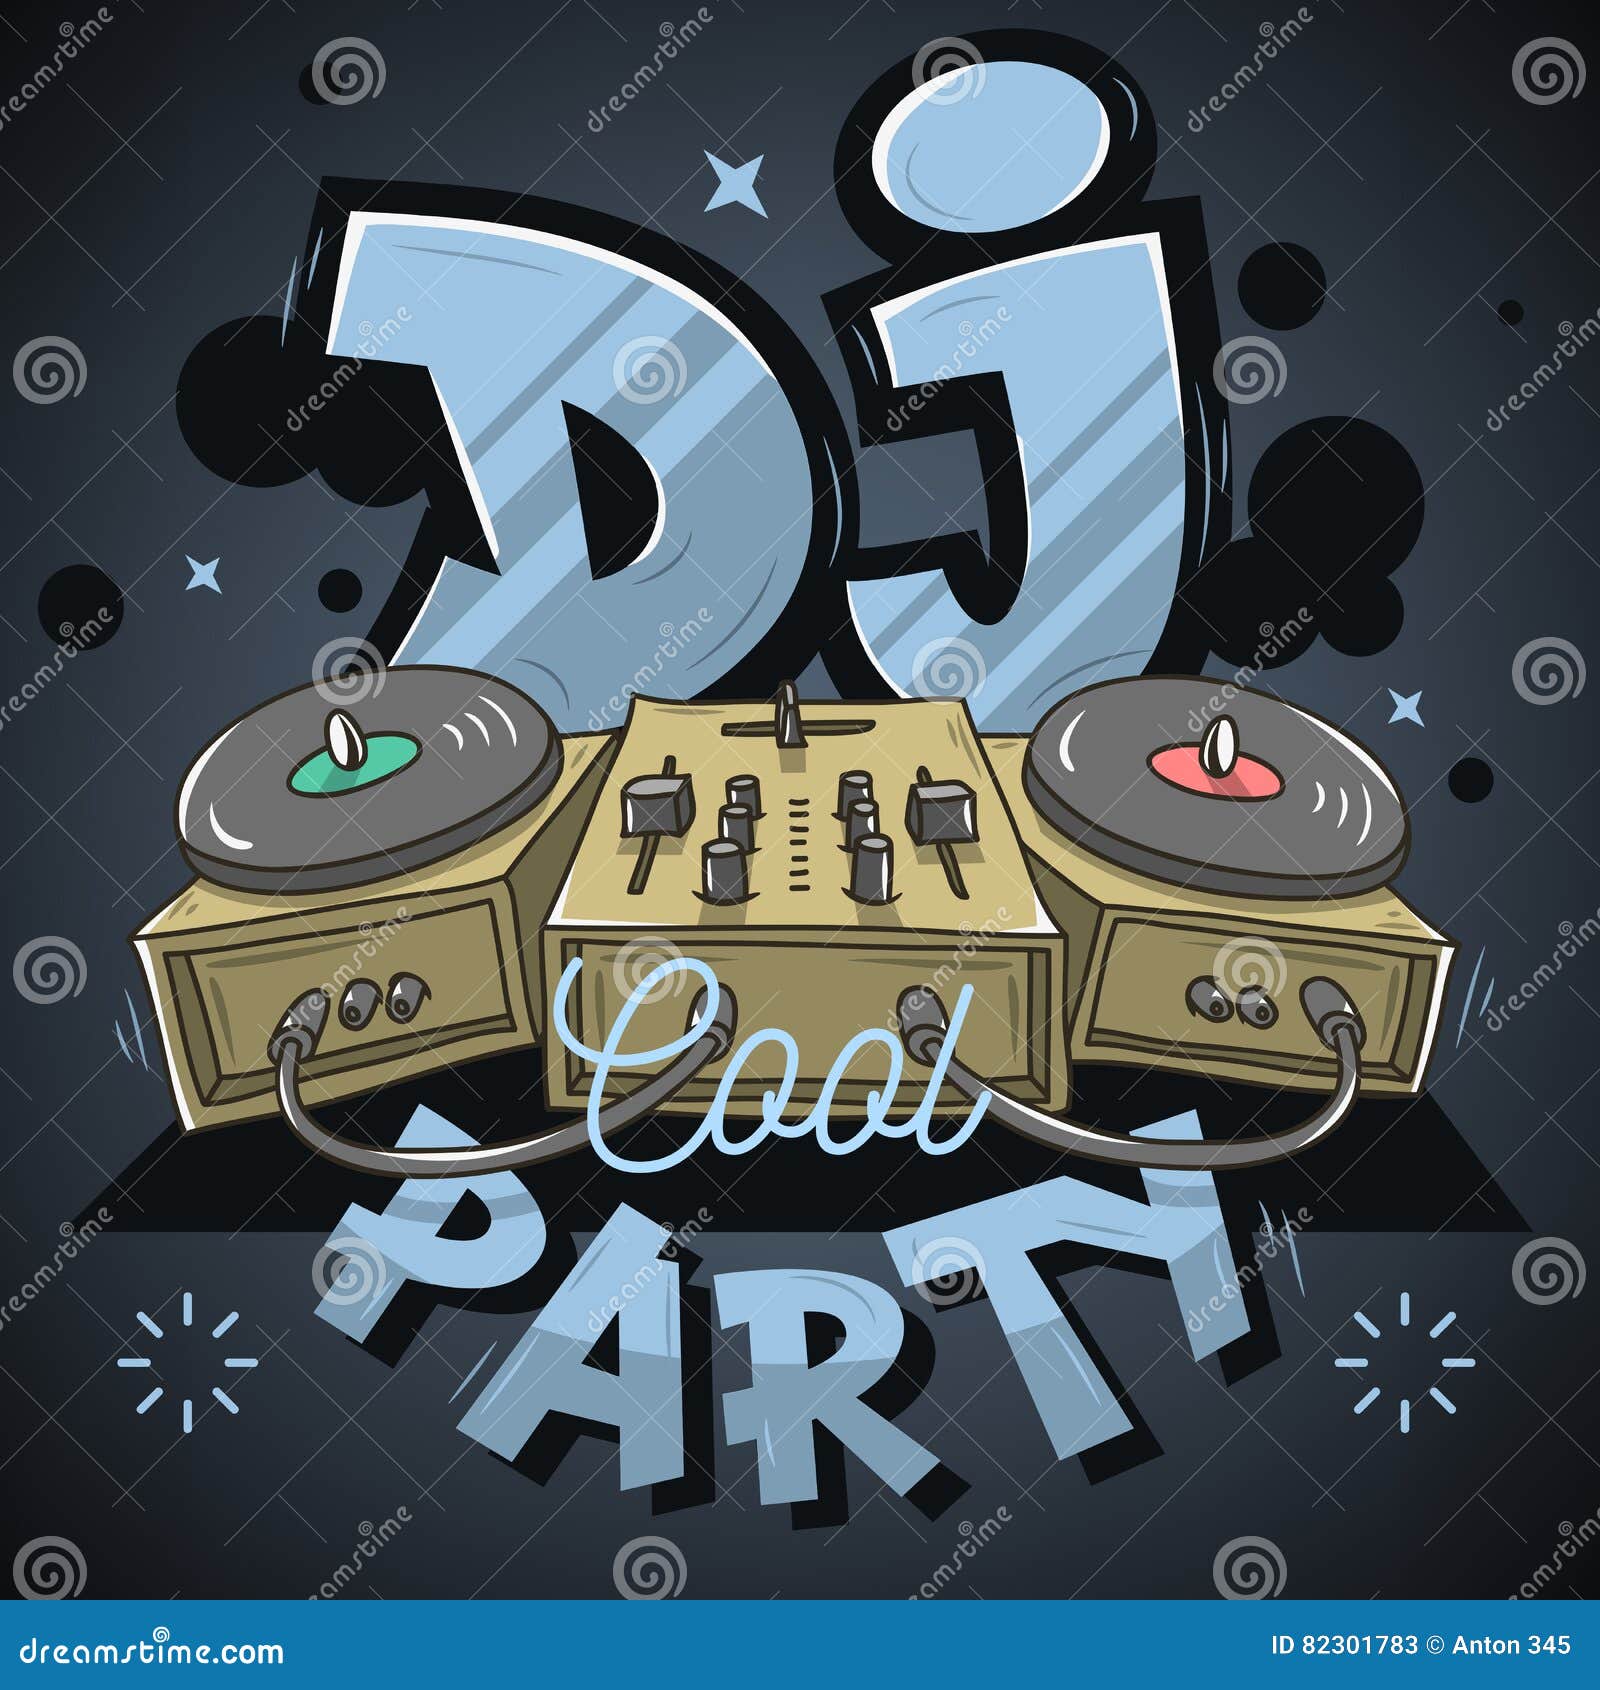 Dj Cool Party Design for Event Poster. Sound Mixer and Gramophones Funny  Cartoon Illustration Stock Vector - Illustration of dance, headphone:  82301783